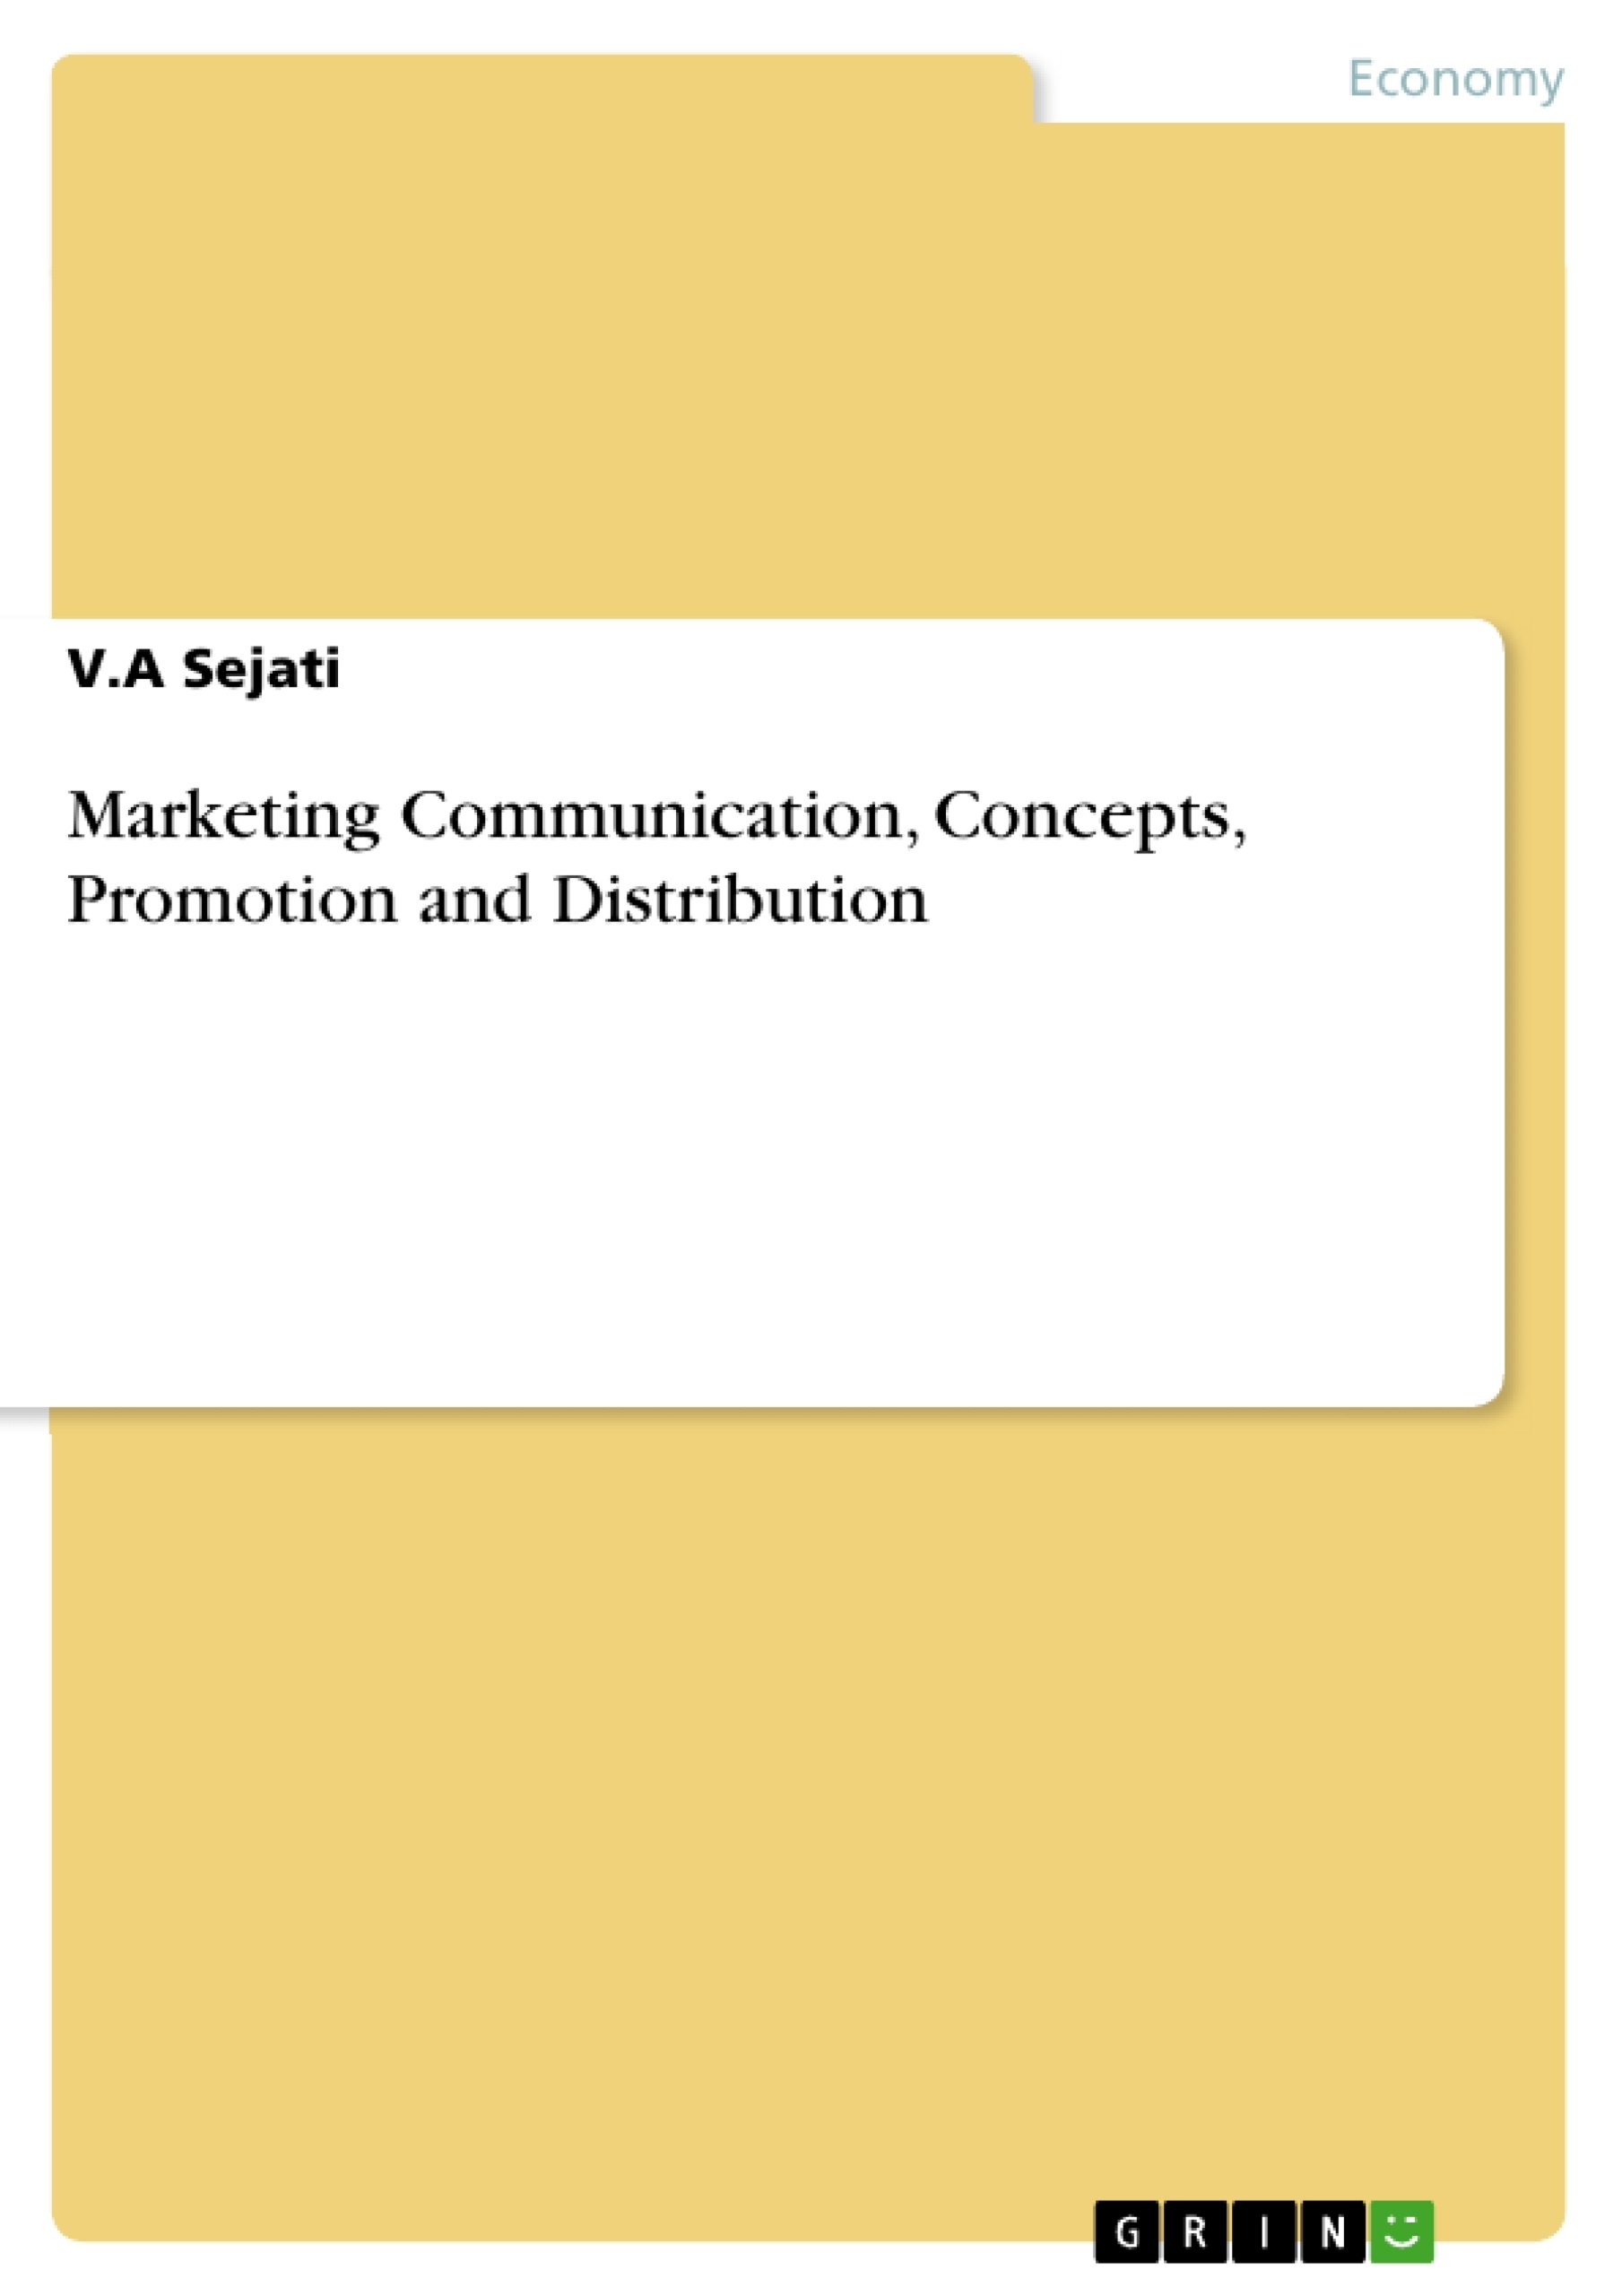 Title: Marketing Communication, Concepts, Promotion and Distribution